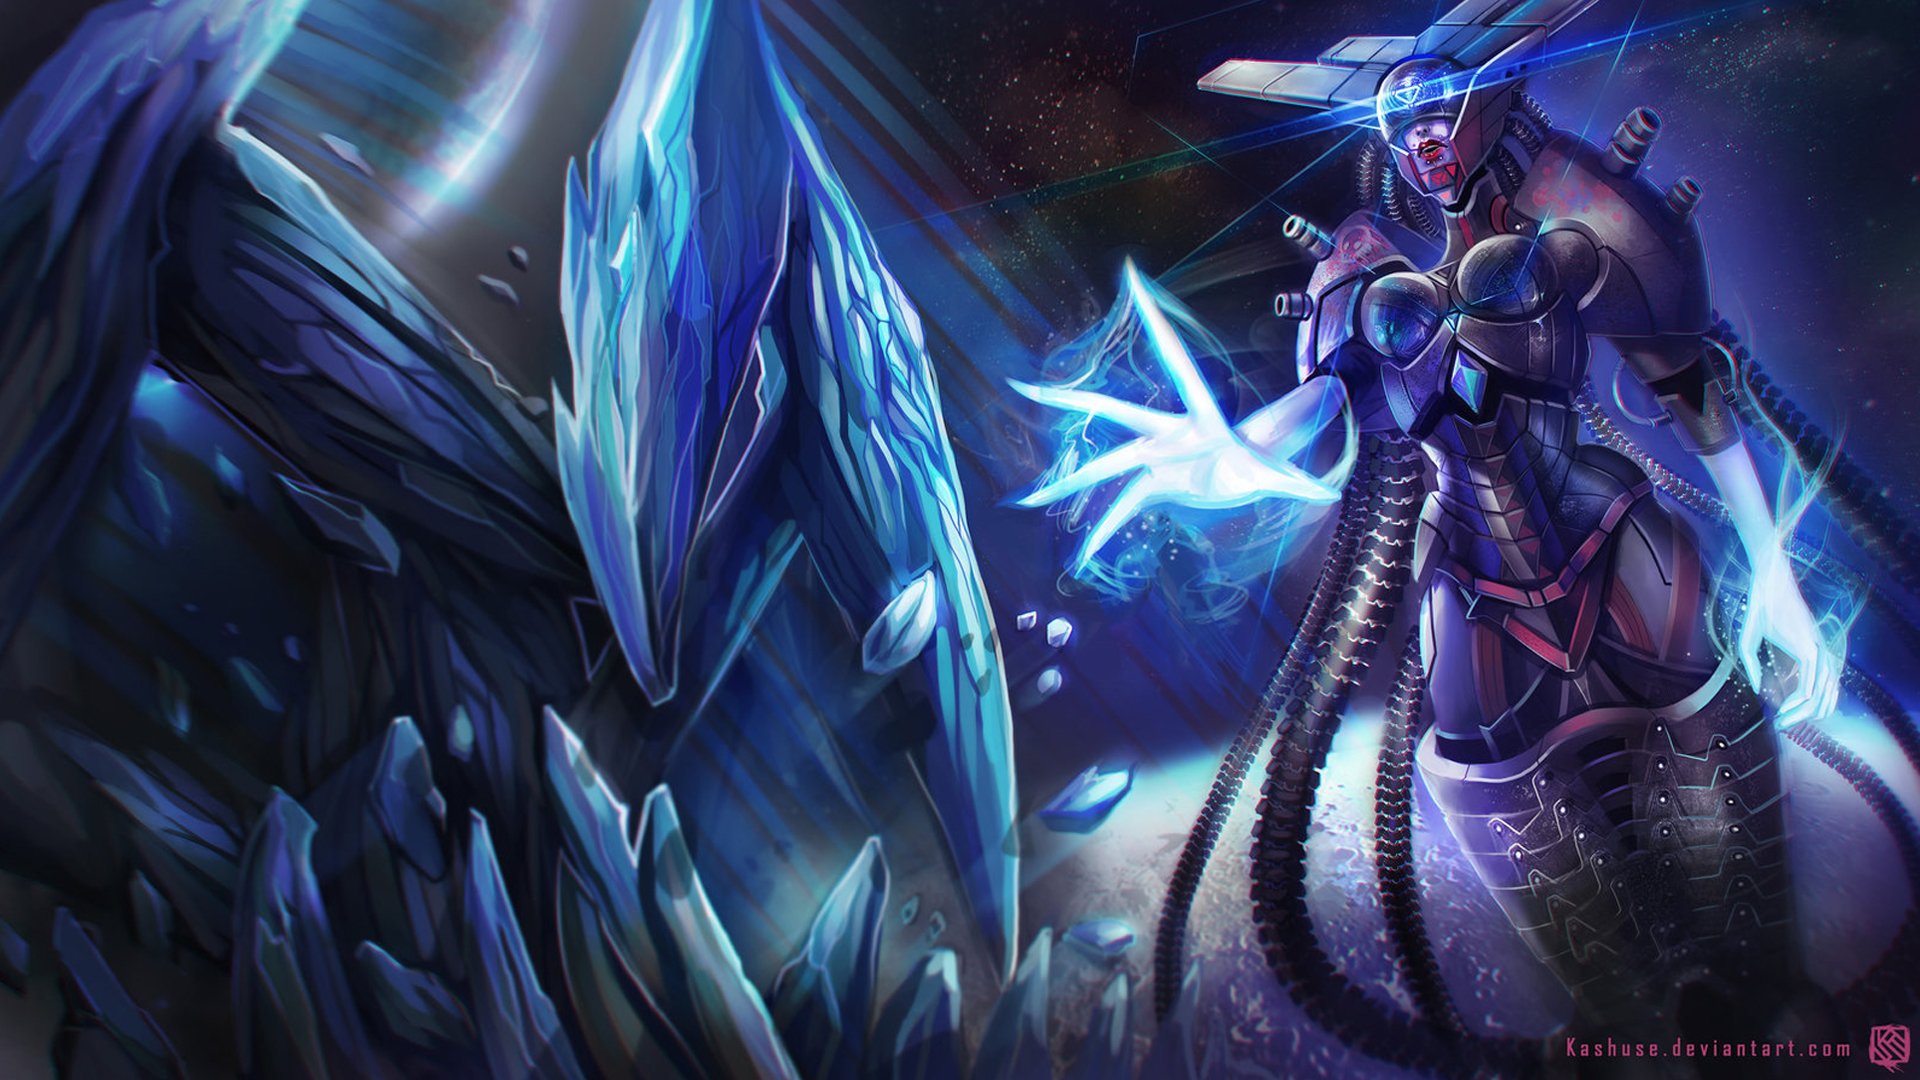 22 Lissandra League Of Legends Hd Wallpapers Background Images Images, Photos, Reviews